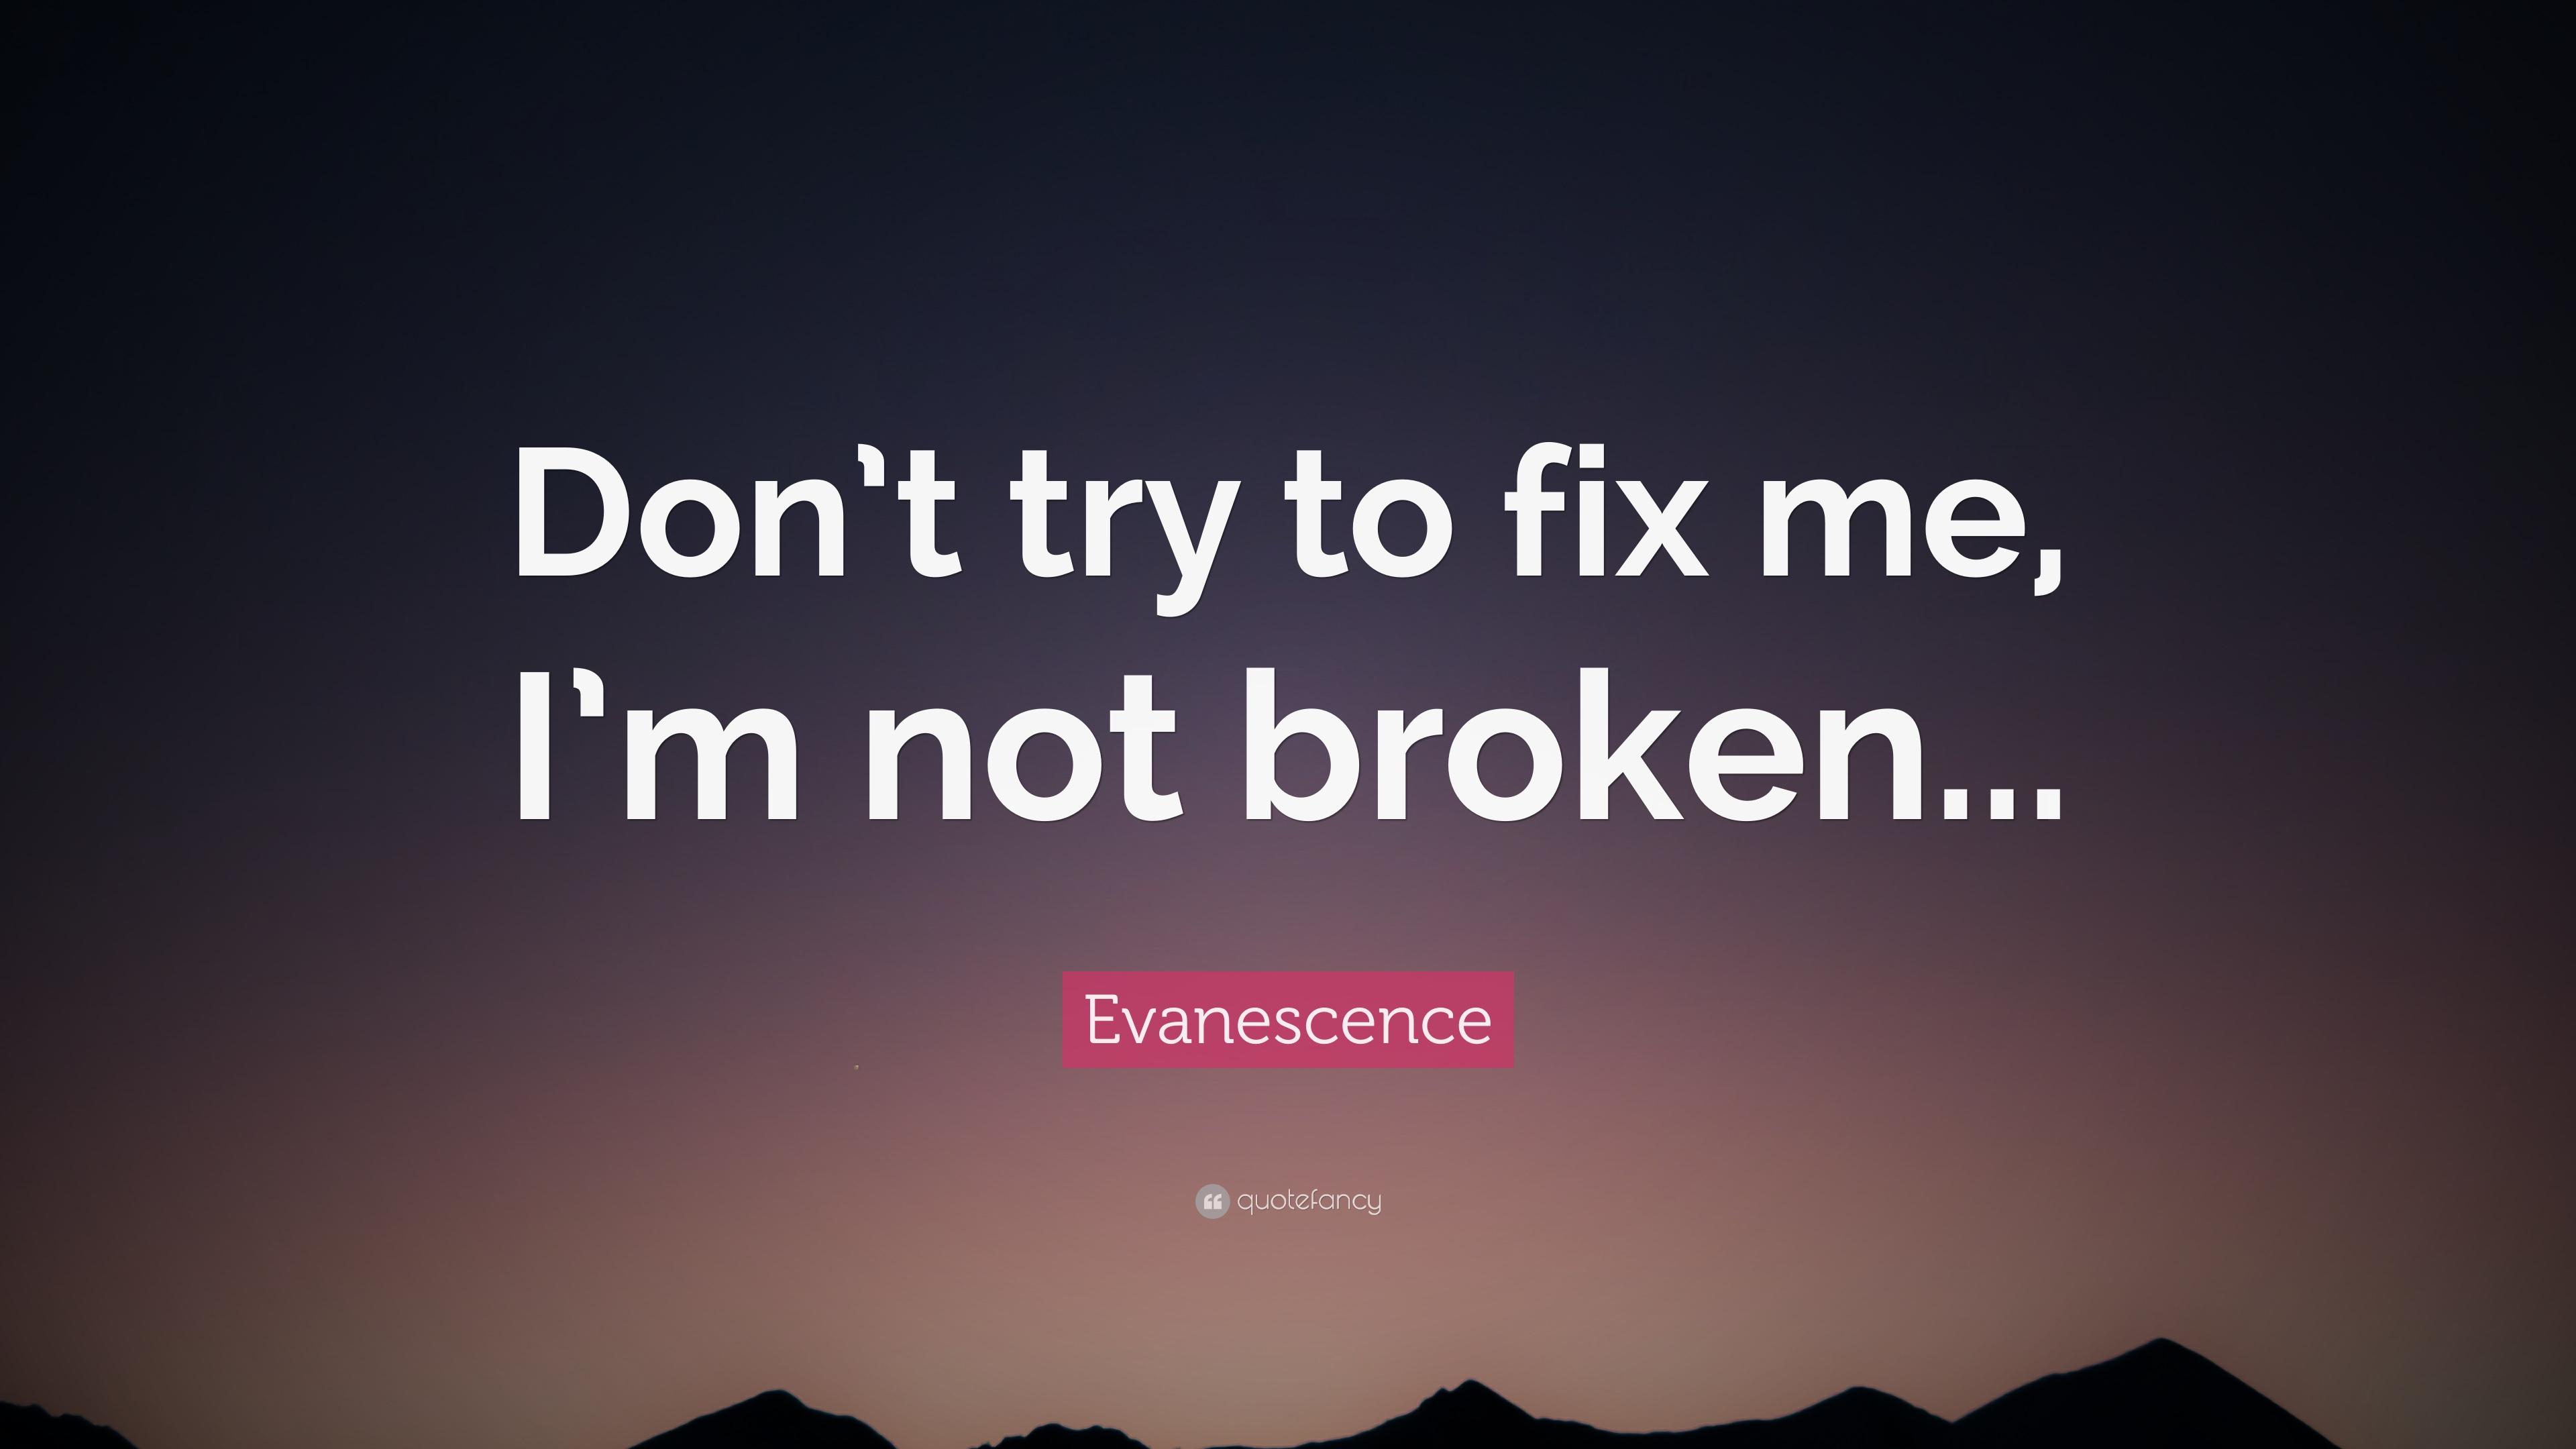 Evanescence Quote: “Don't try to fix me, I'm not broken.” 12